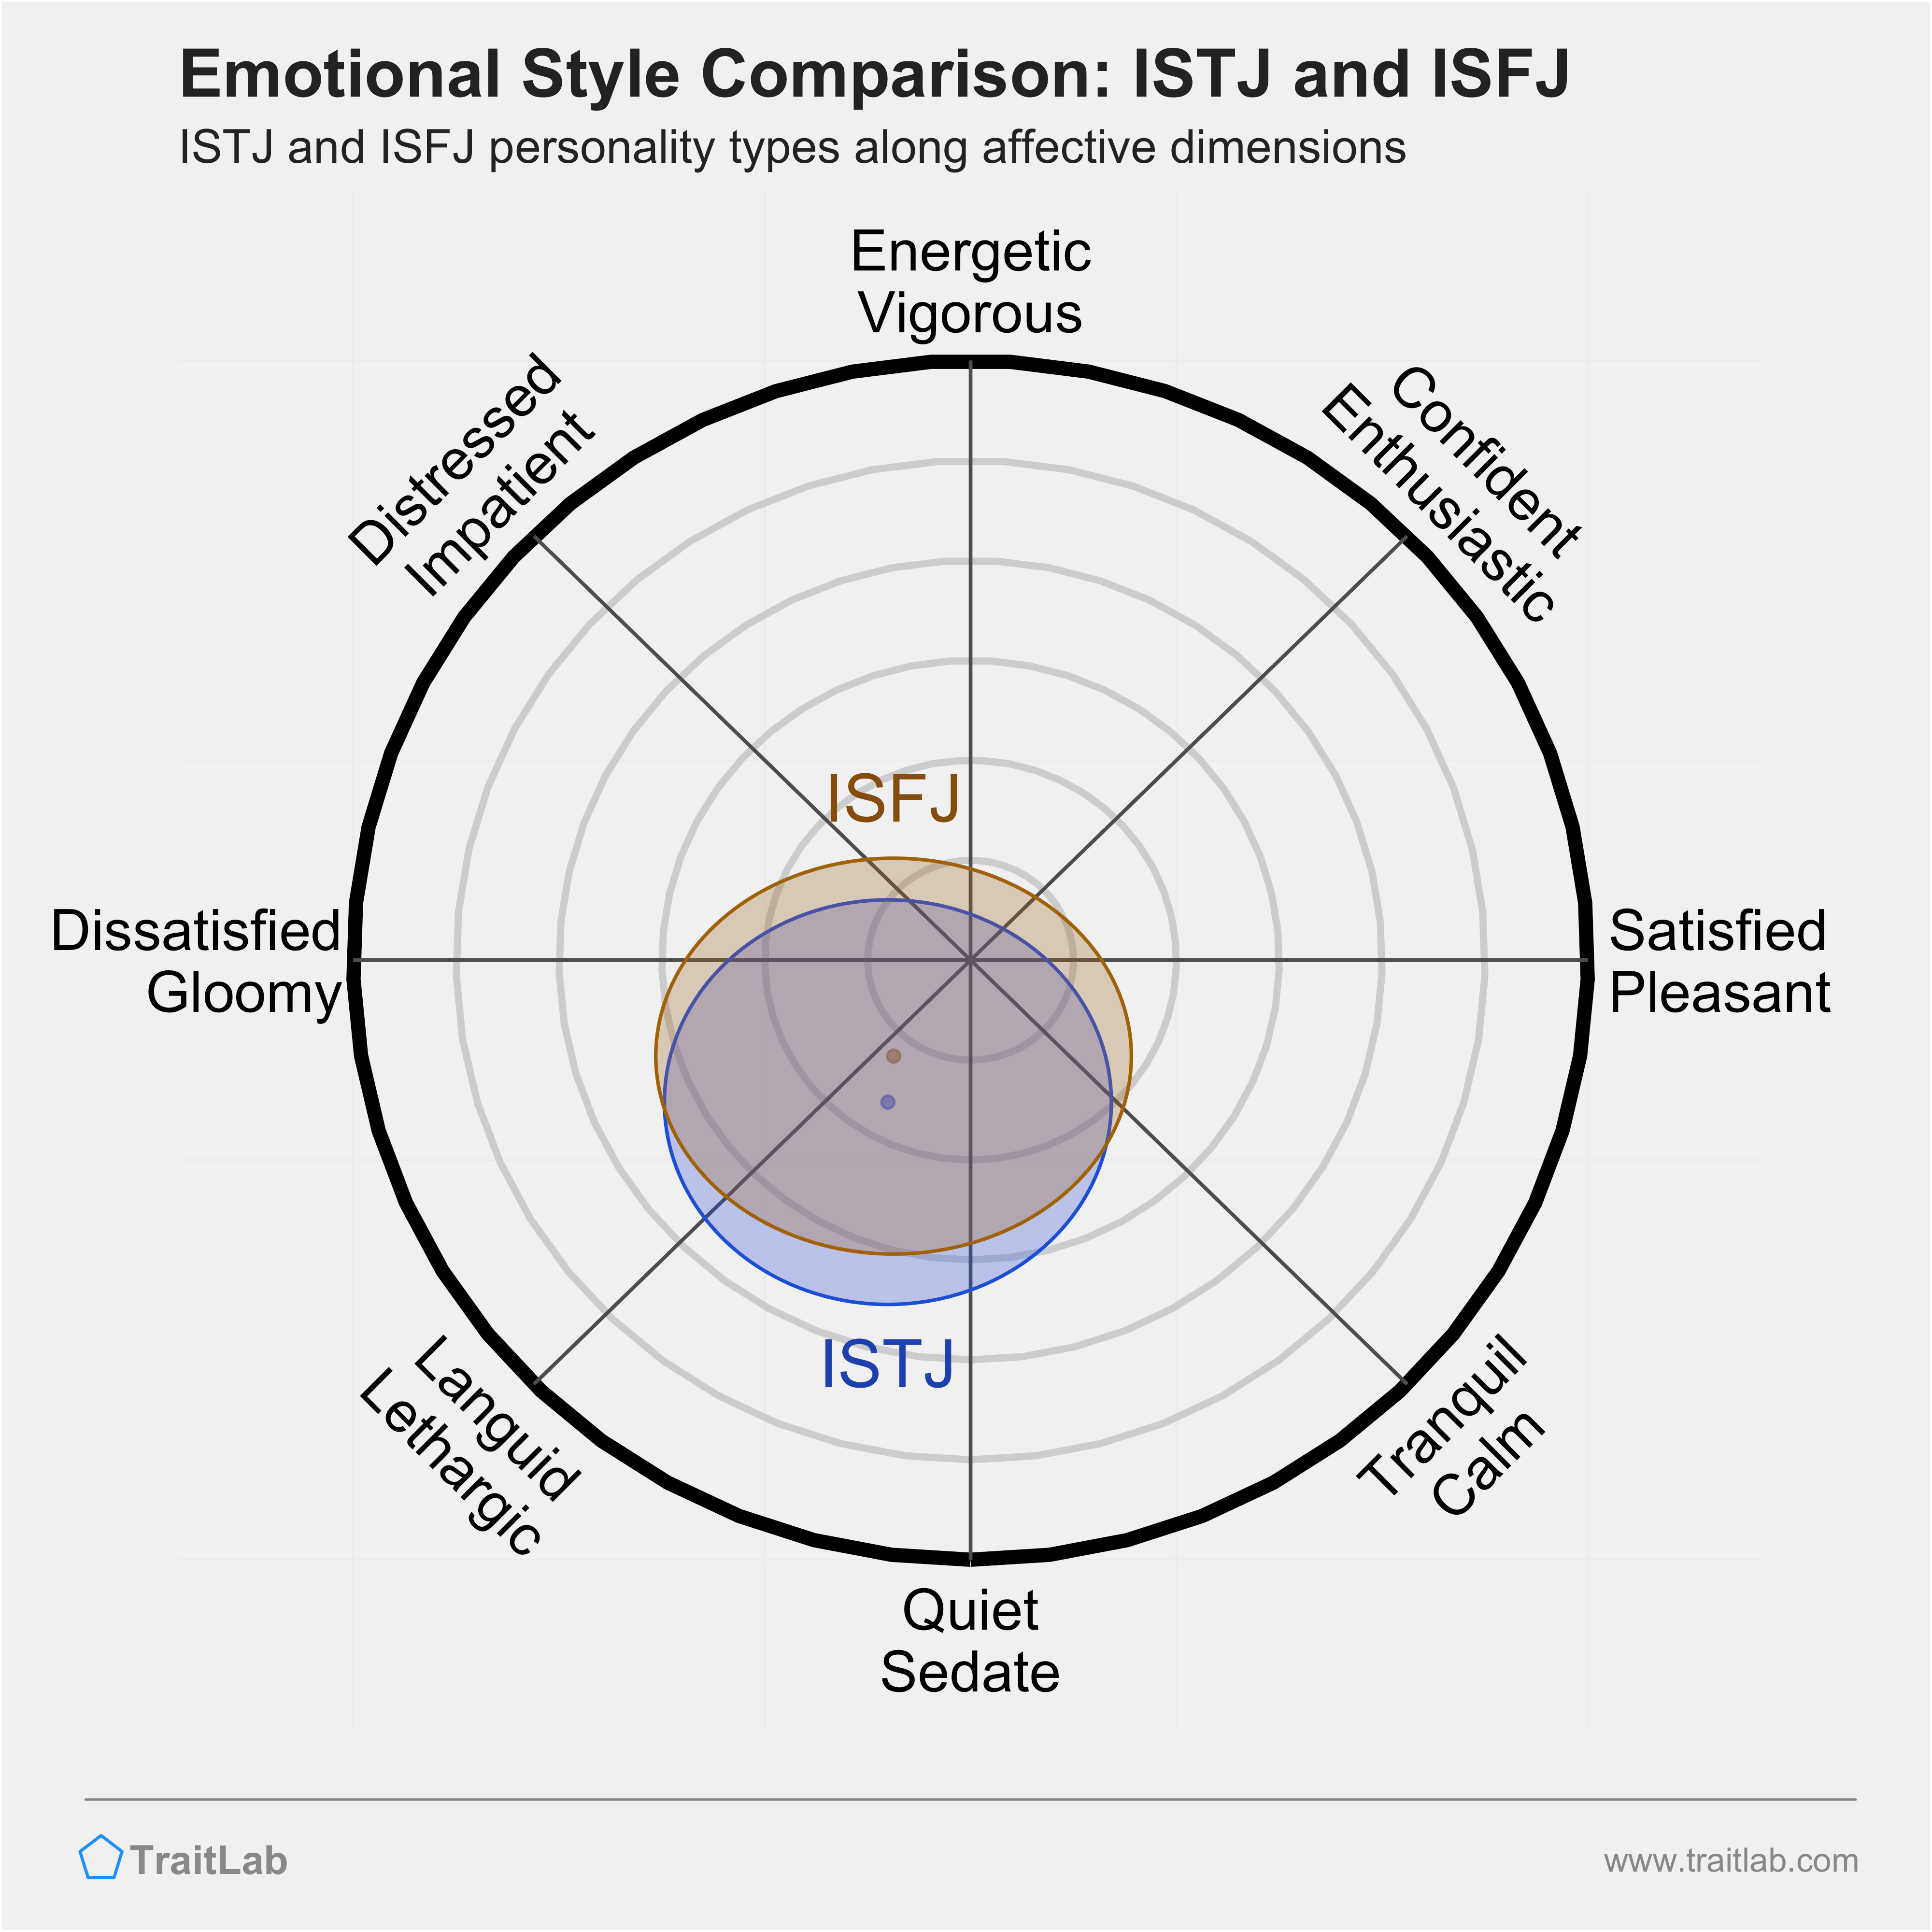 ISTJ and ISFJ comparison across emotional (affective) dimensions